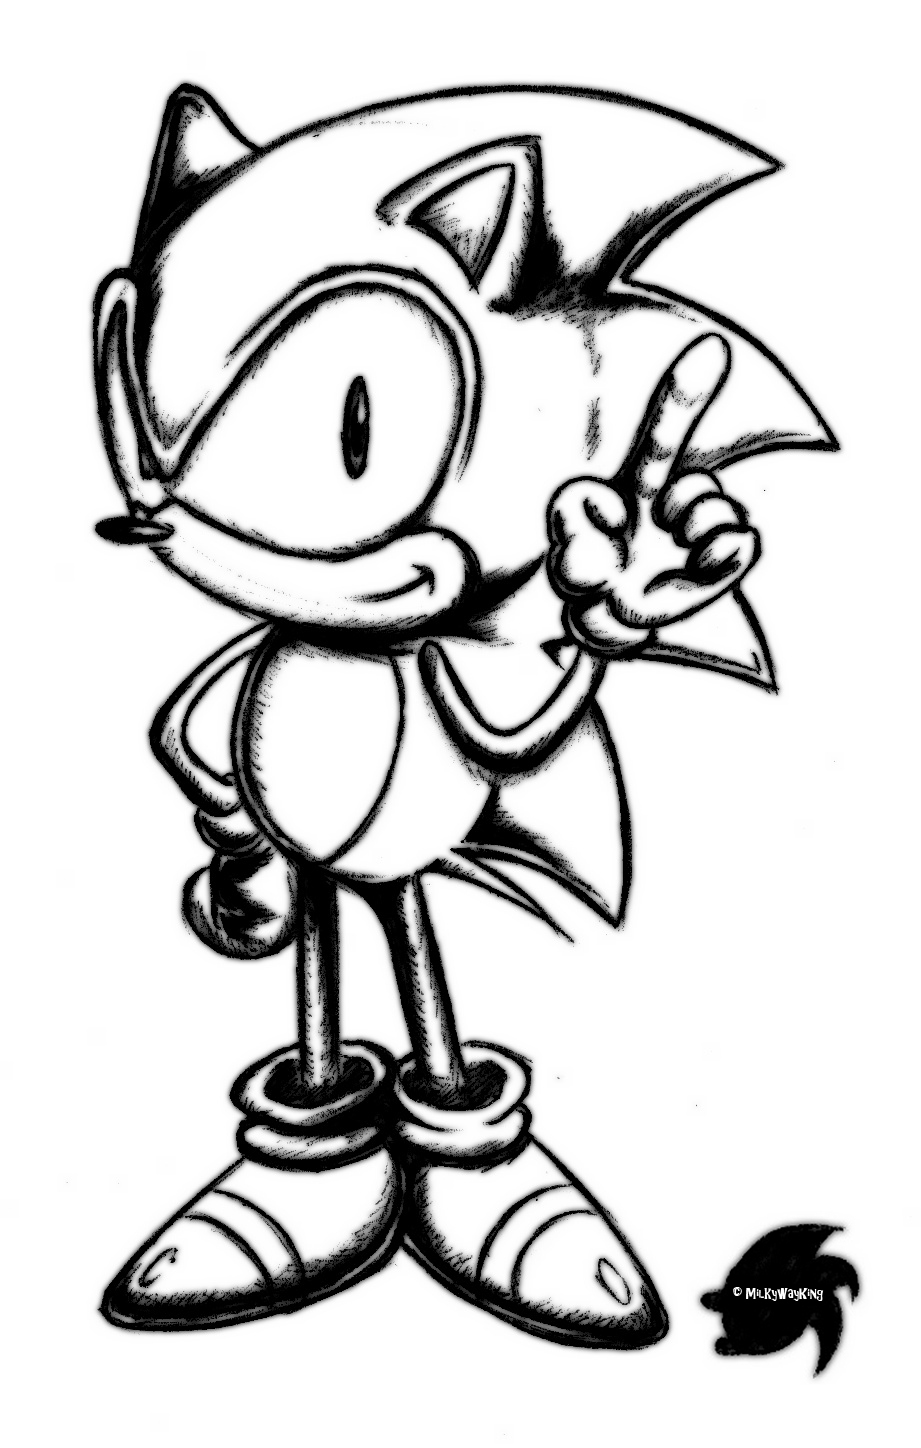 Sonic the Hedgehog Sketch - Classic Sonic by MilkywayKing on